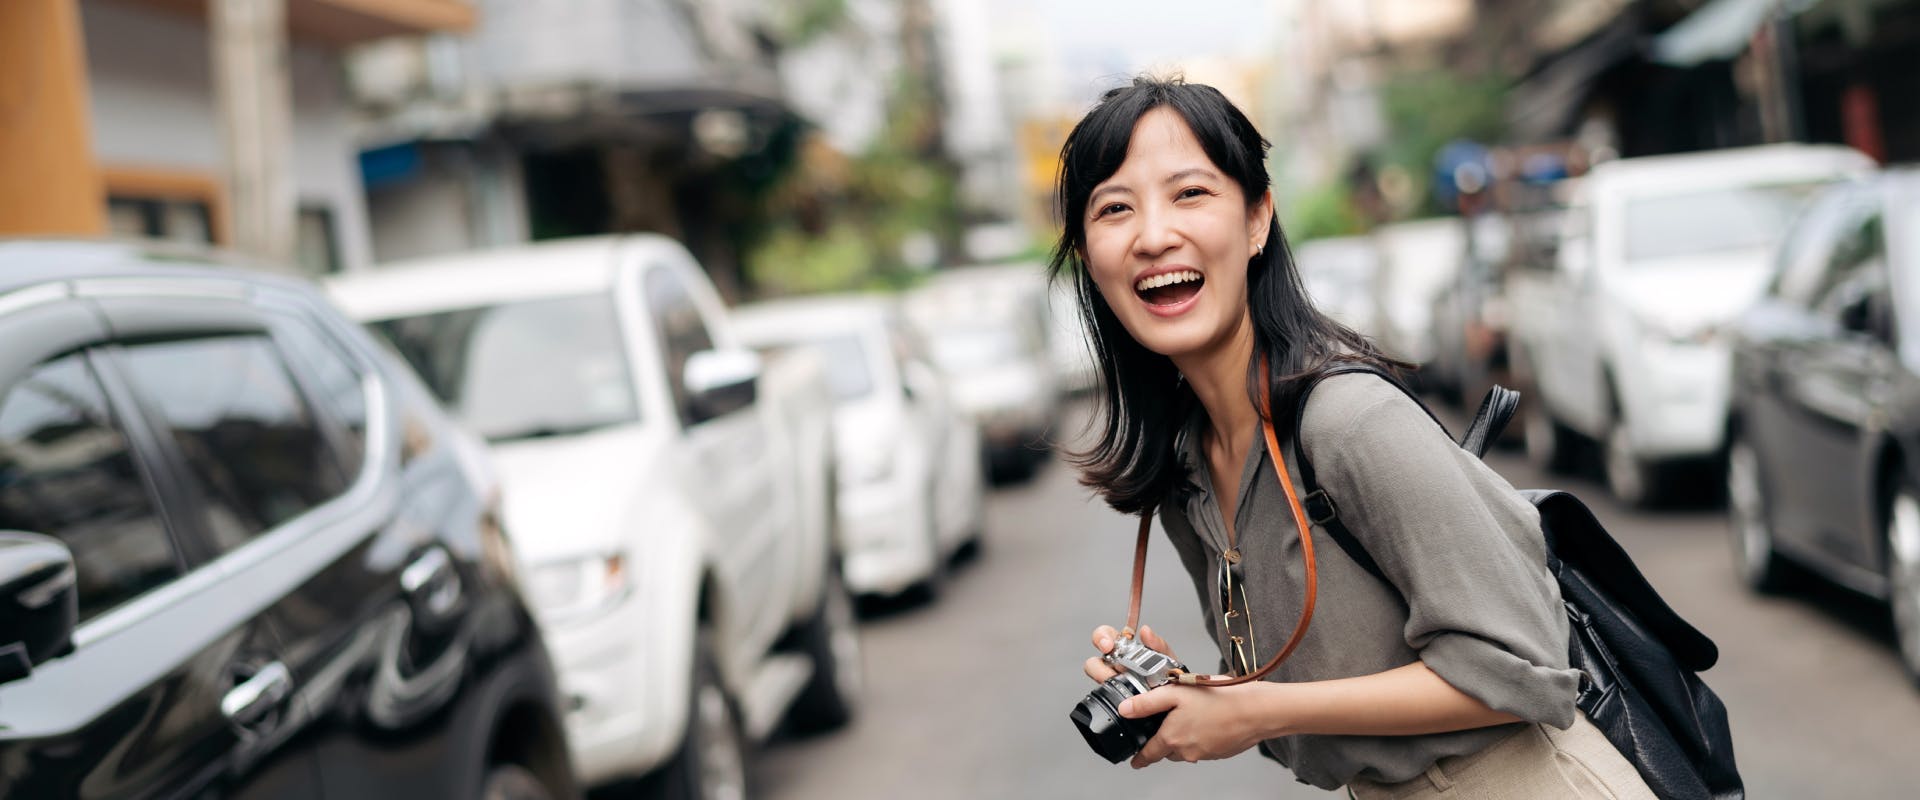 A female solo traveler laughs as she takes a photo.